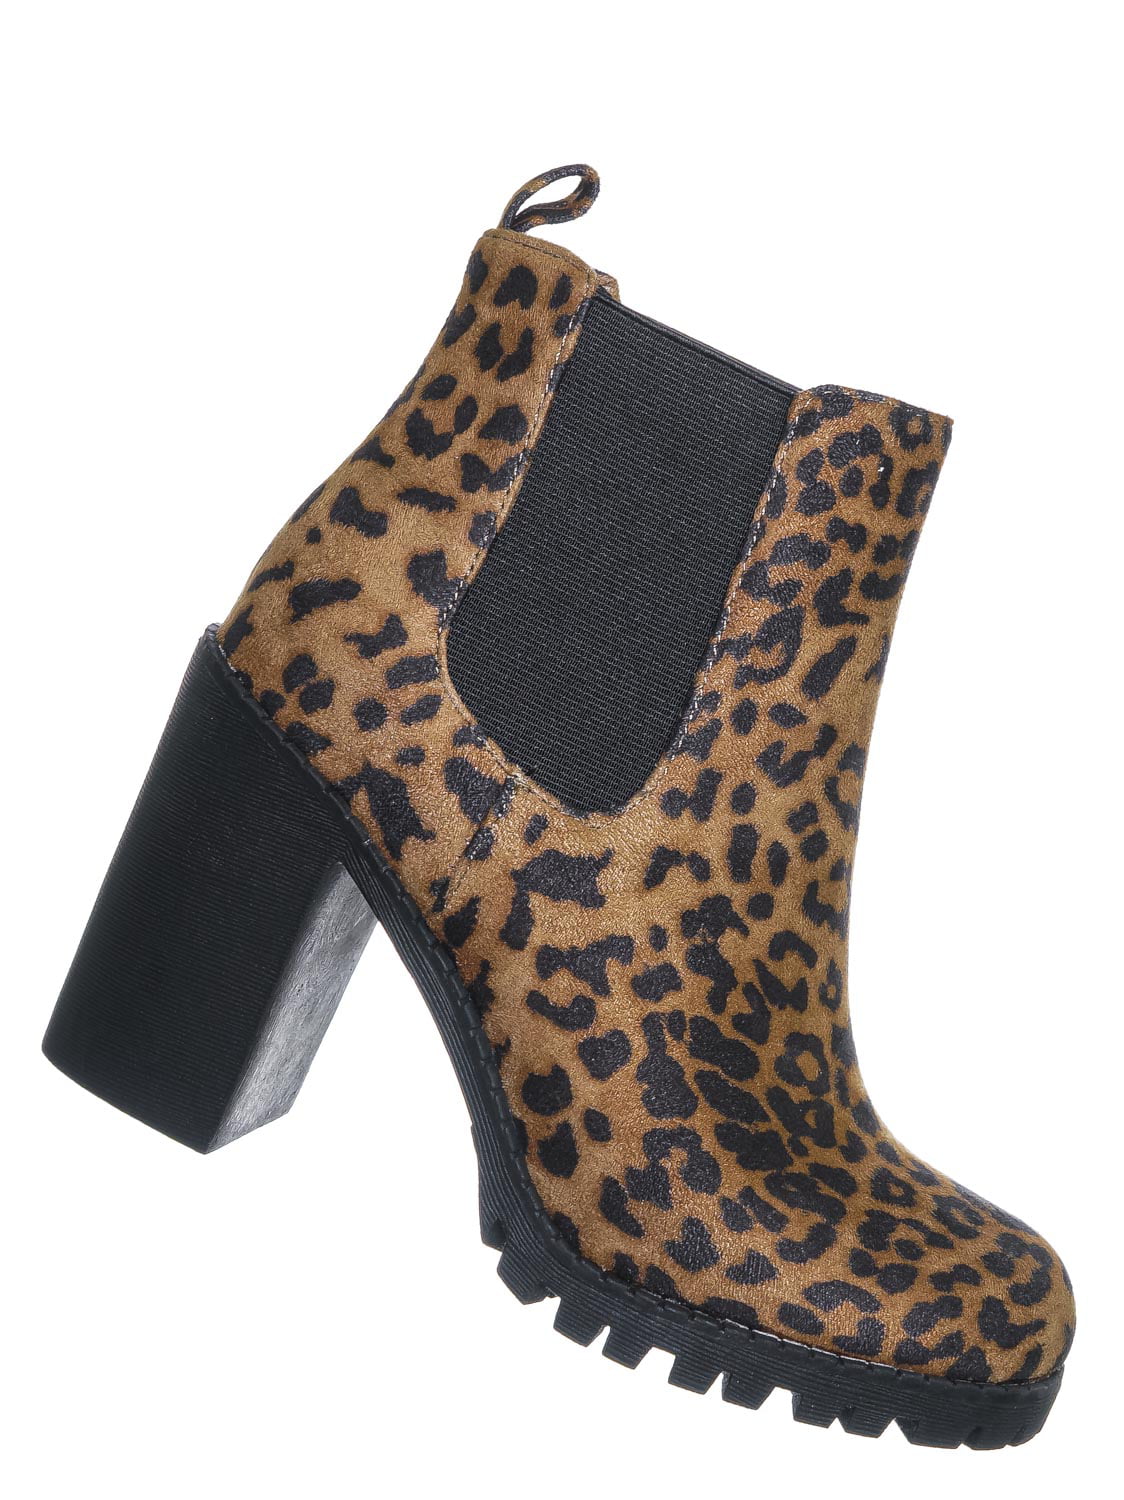 WOMENS LEOPARD SKIN ANKLE CHELSEA LADIES ZIP BLOCK CHUNKY HEEL SHOES BOOTS SIZE 